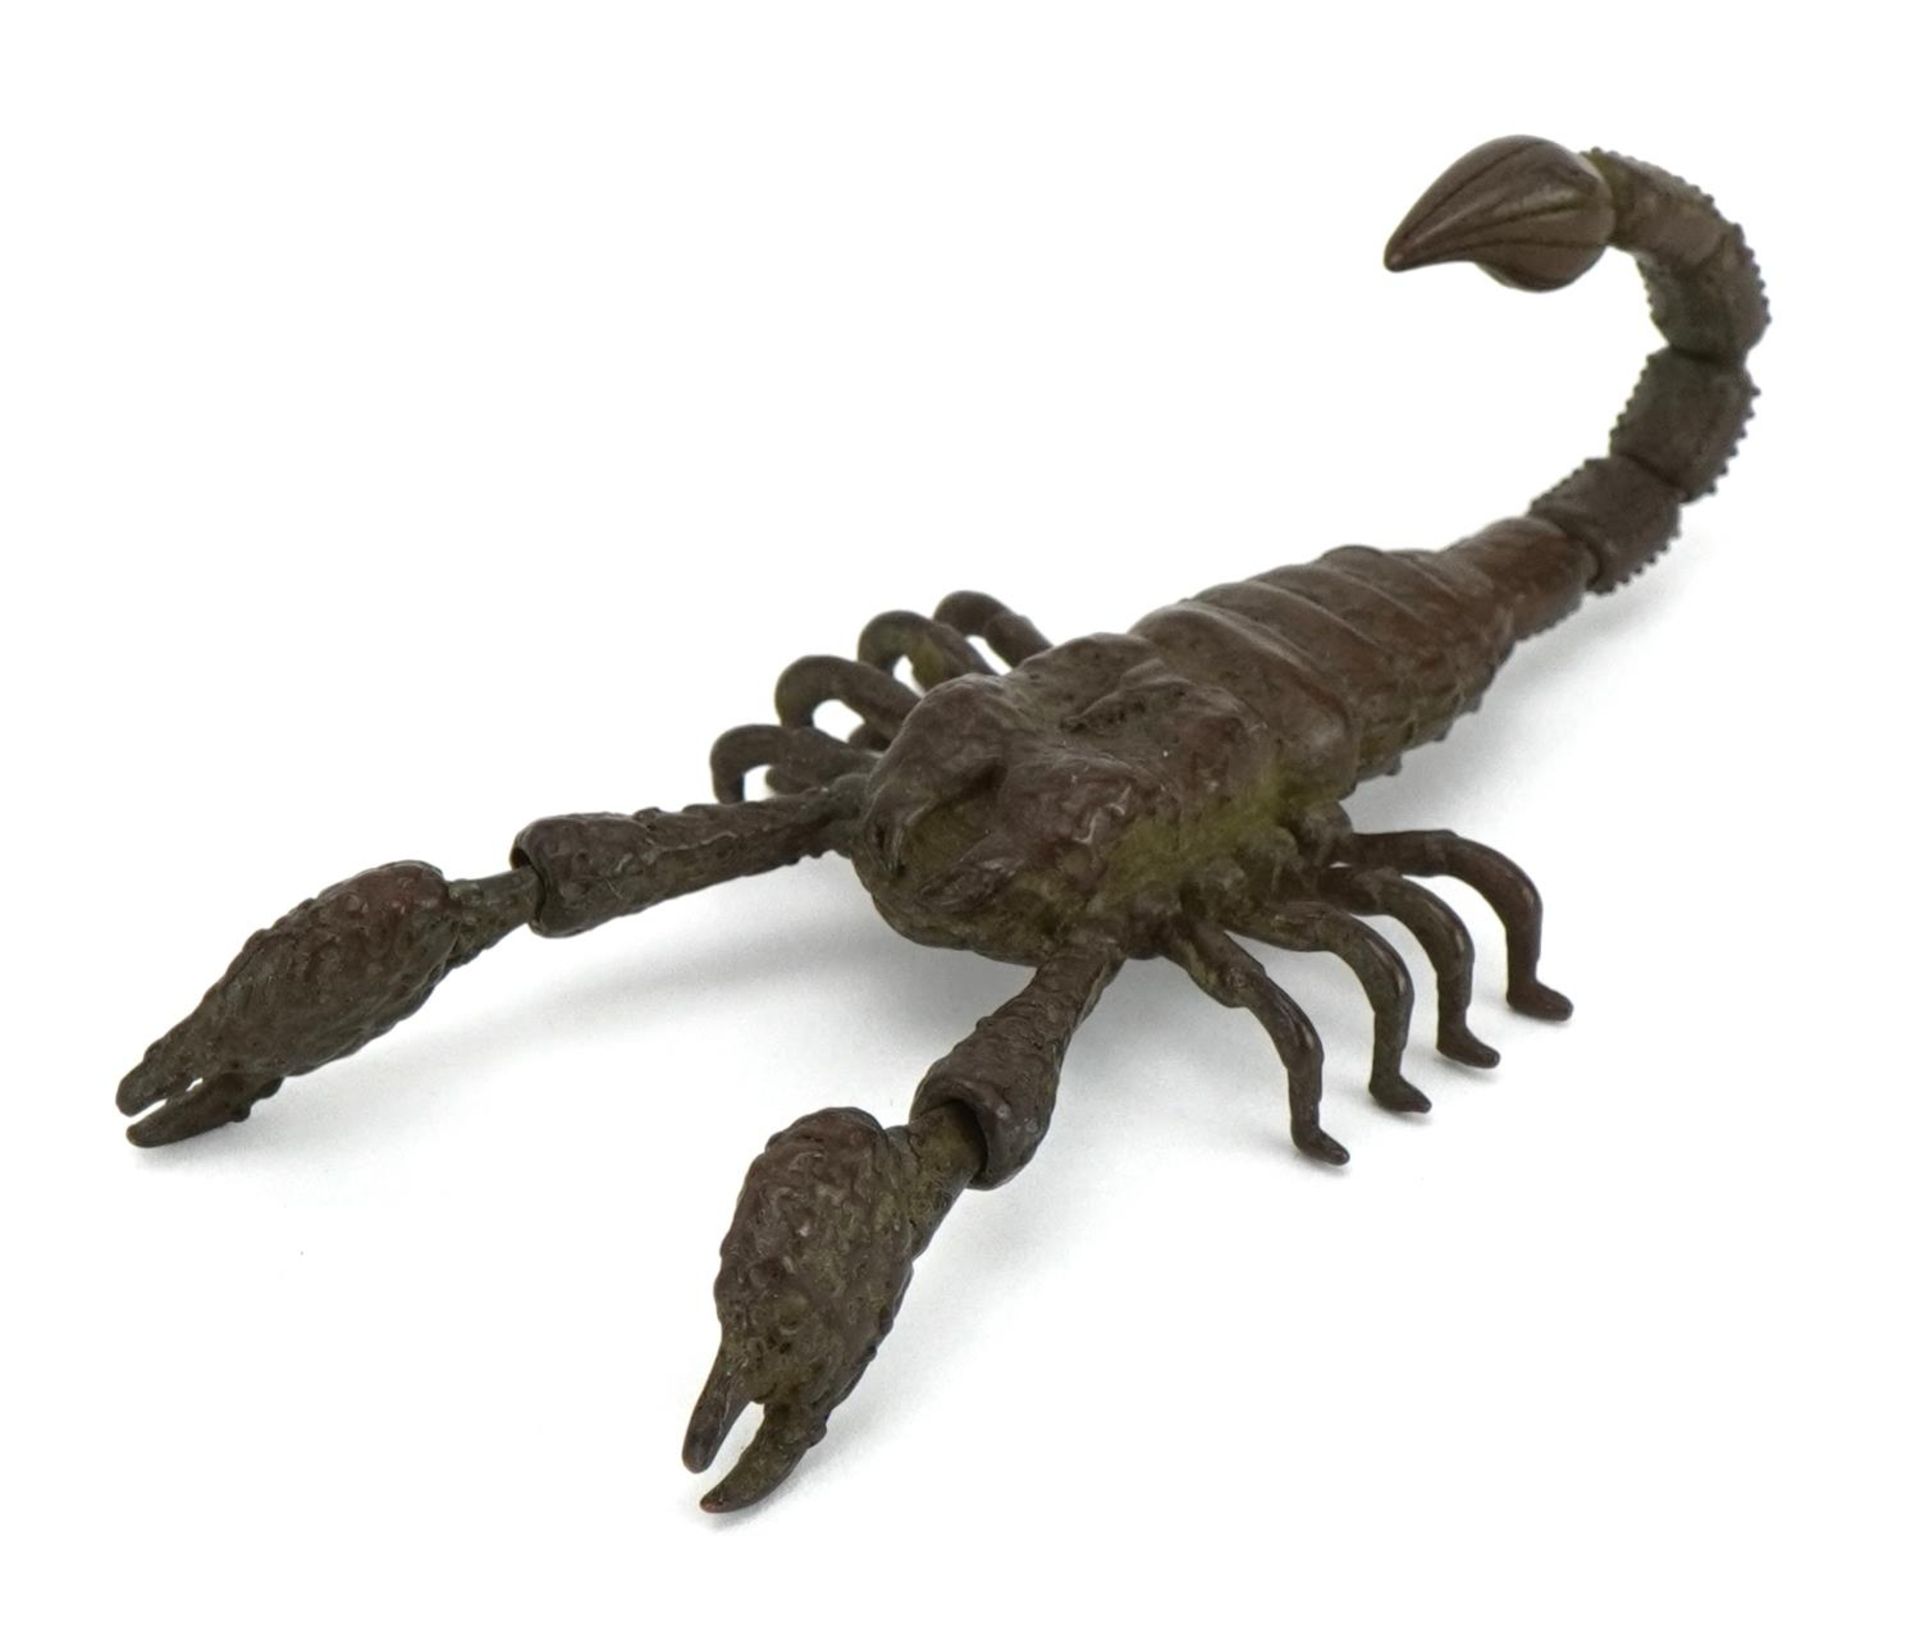 Japanese patinated bronze scorpion with articulated claws and tail, 9cm in length